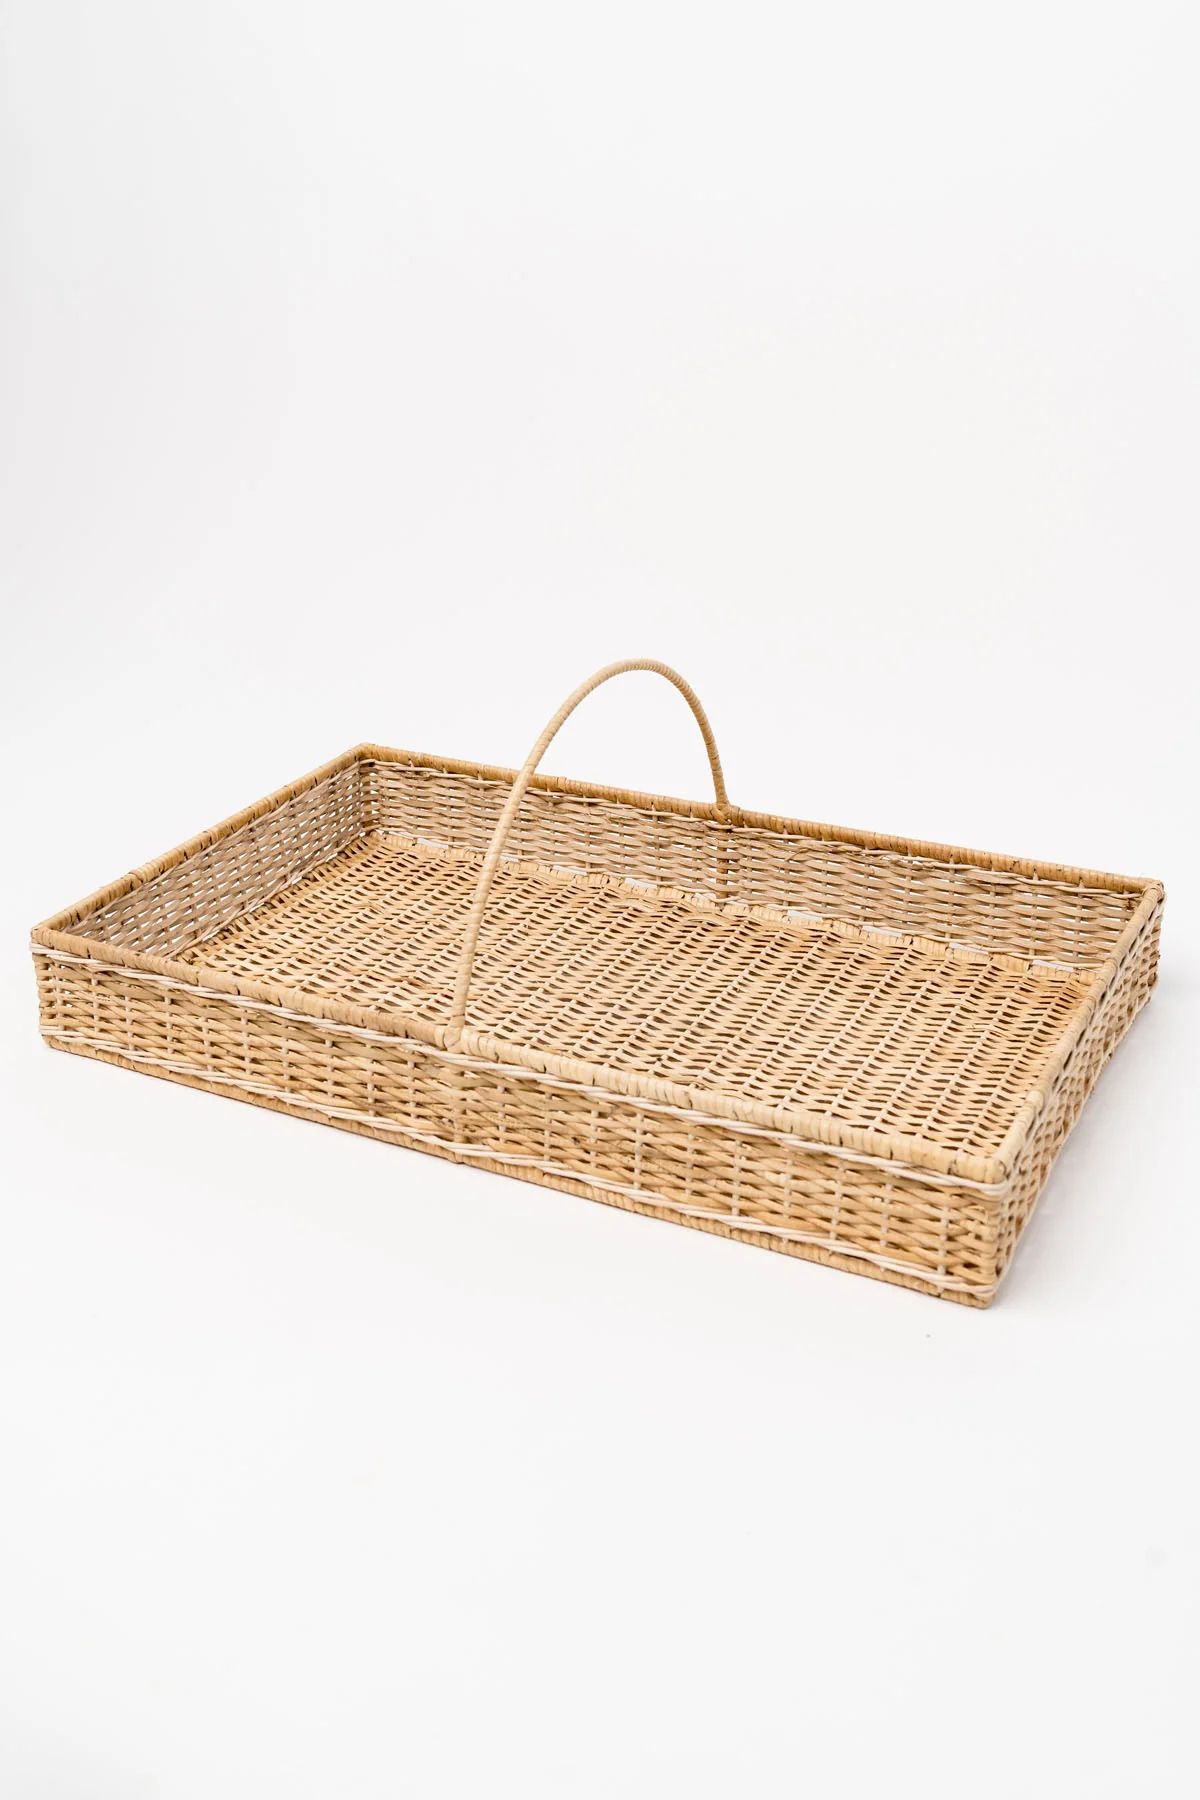 Large Wicker Tray - Natural | Rachel Parcell